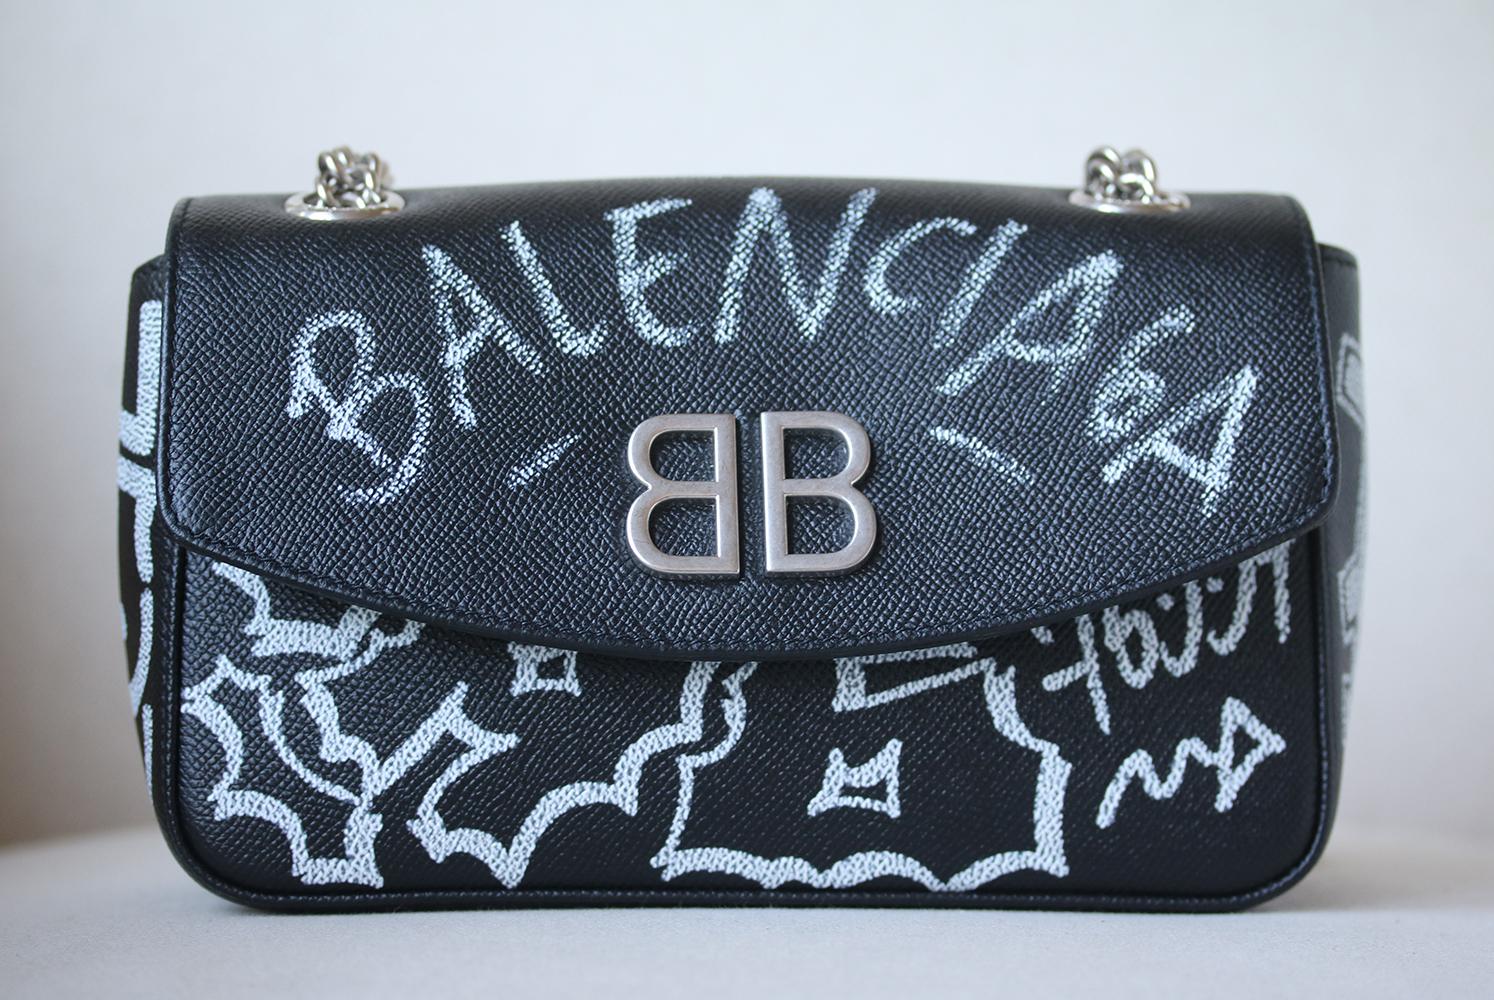 Balenciaga’s BB cross-body bag gets a rebellious revamp for Pre-AW18. This black leather iteration is suspended from a silver-tone metal chain and leather cross-body strap, and features irreverent graffiti phrases painted across the exterior,